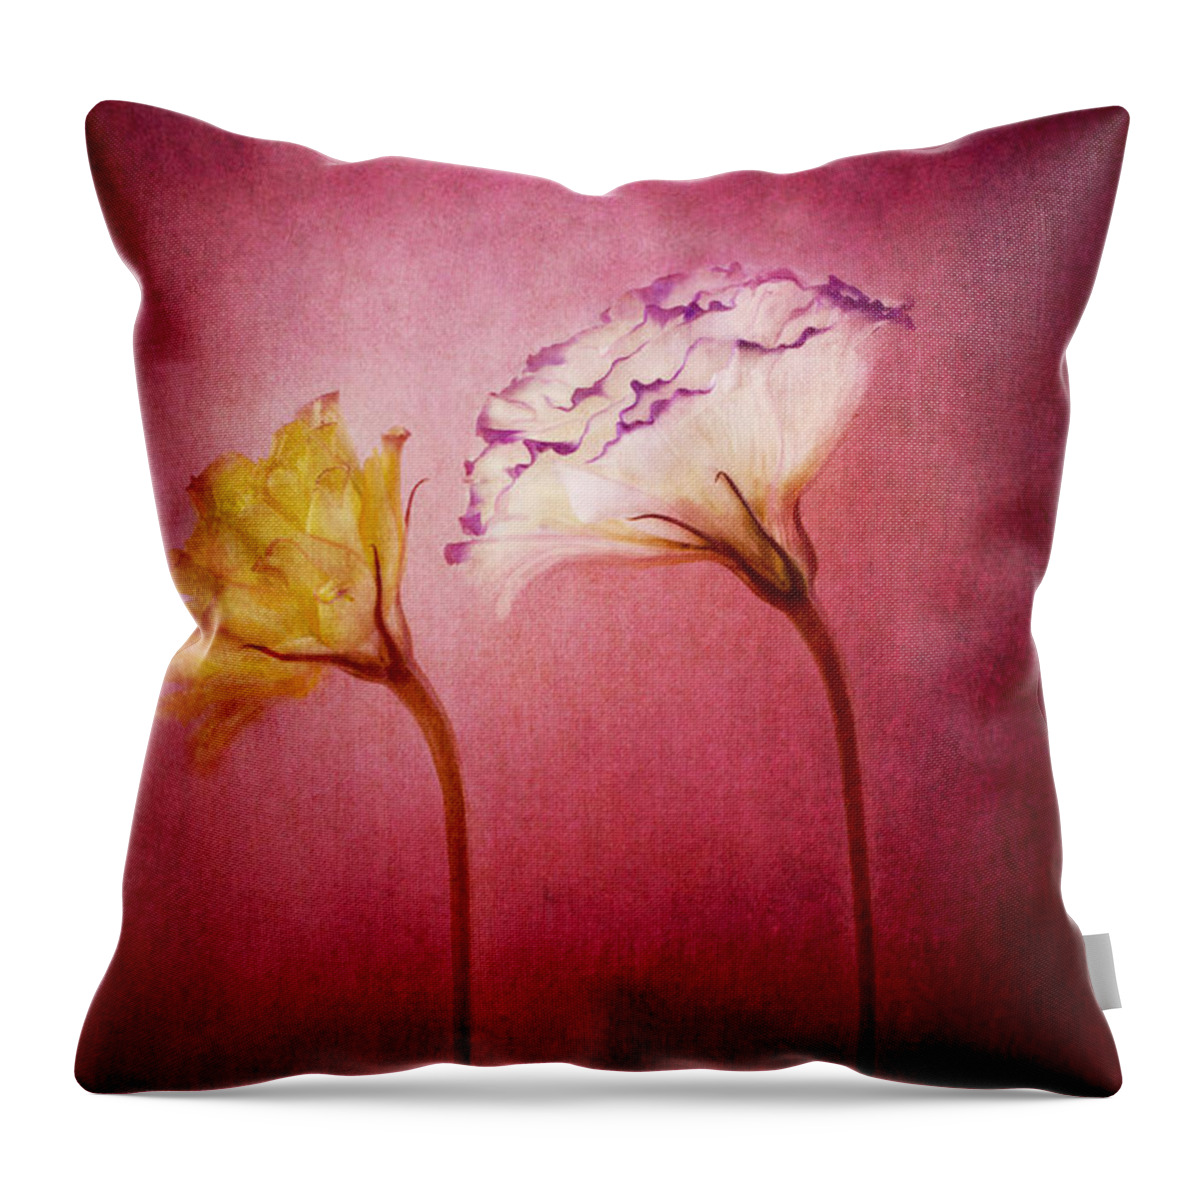 White Flower Throw Pillow featuring the photograph Gentle Touch by Marina Kojukhova